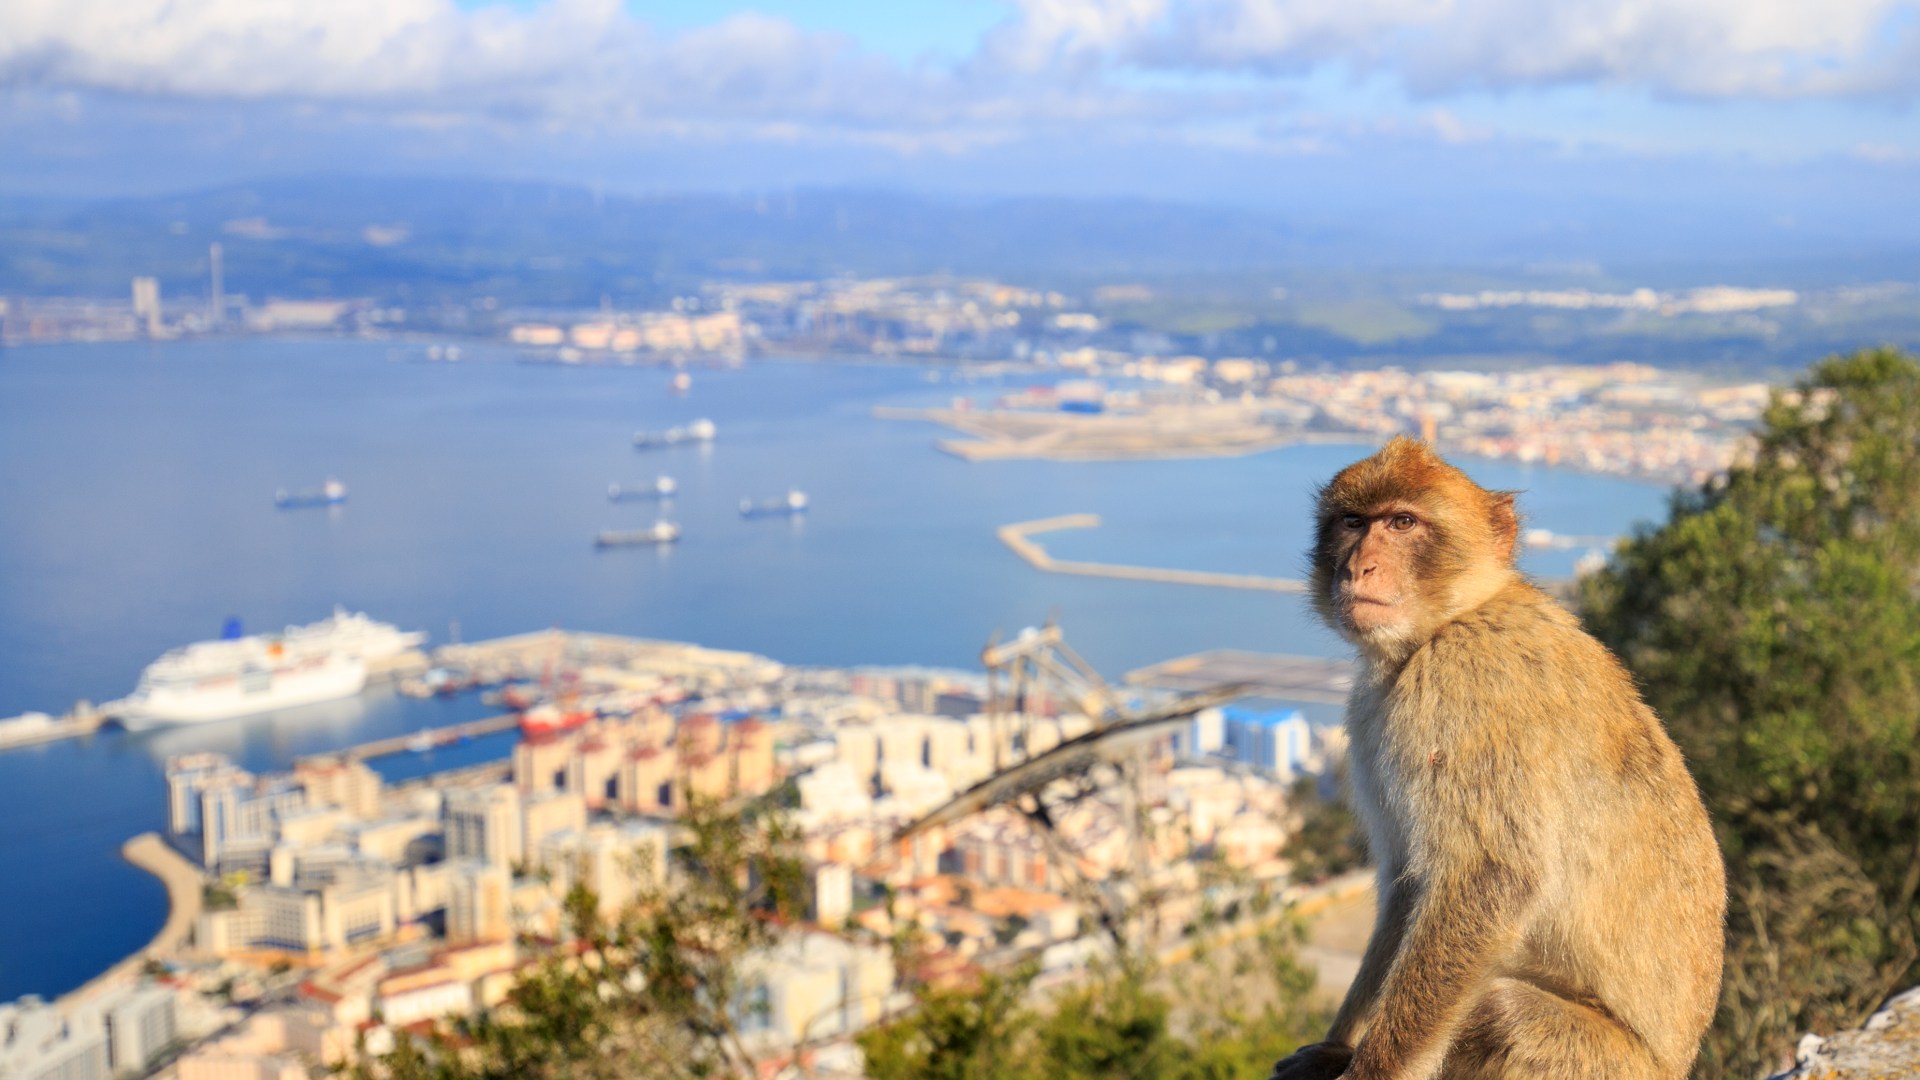 Discover the secret British holiday gem with internal waves and wild monkeys – a unique European paradise!